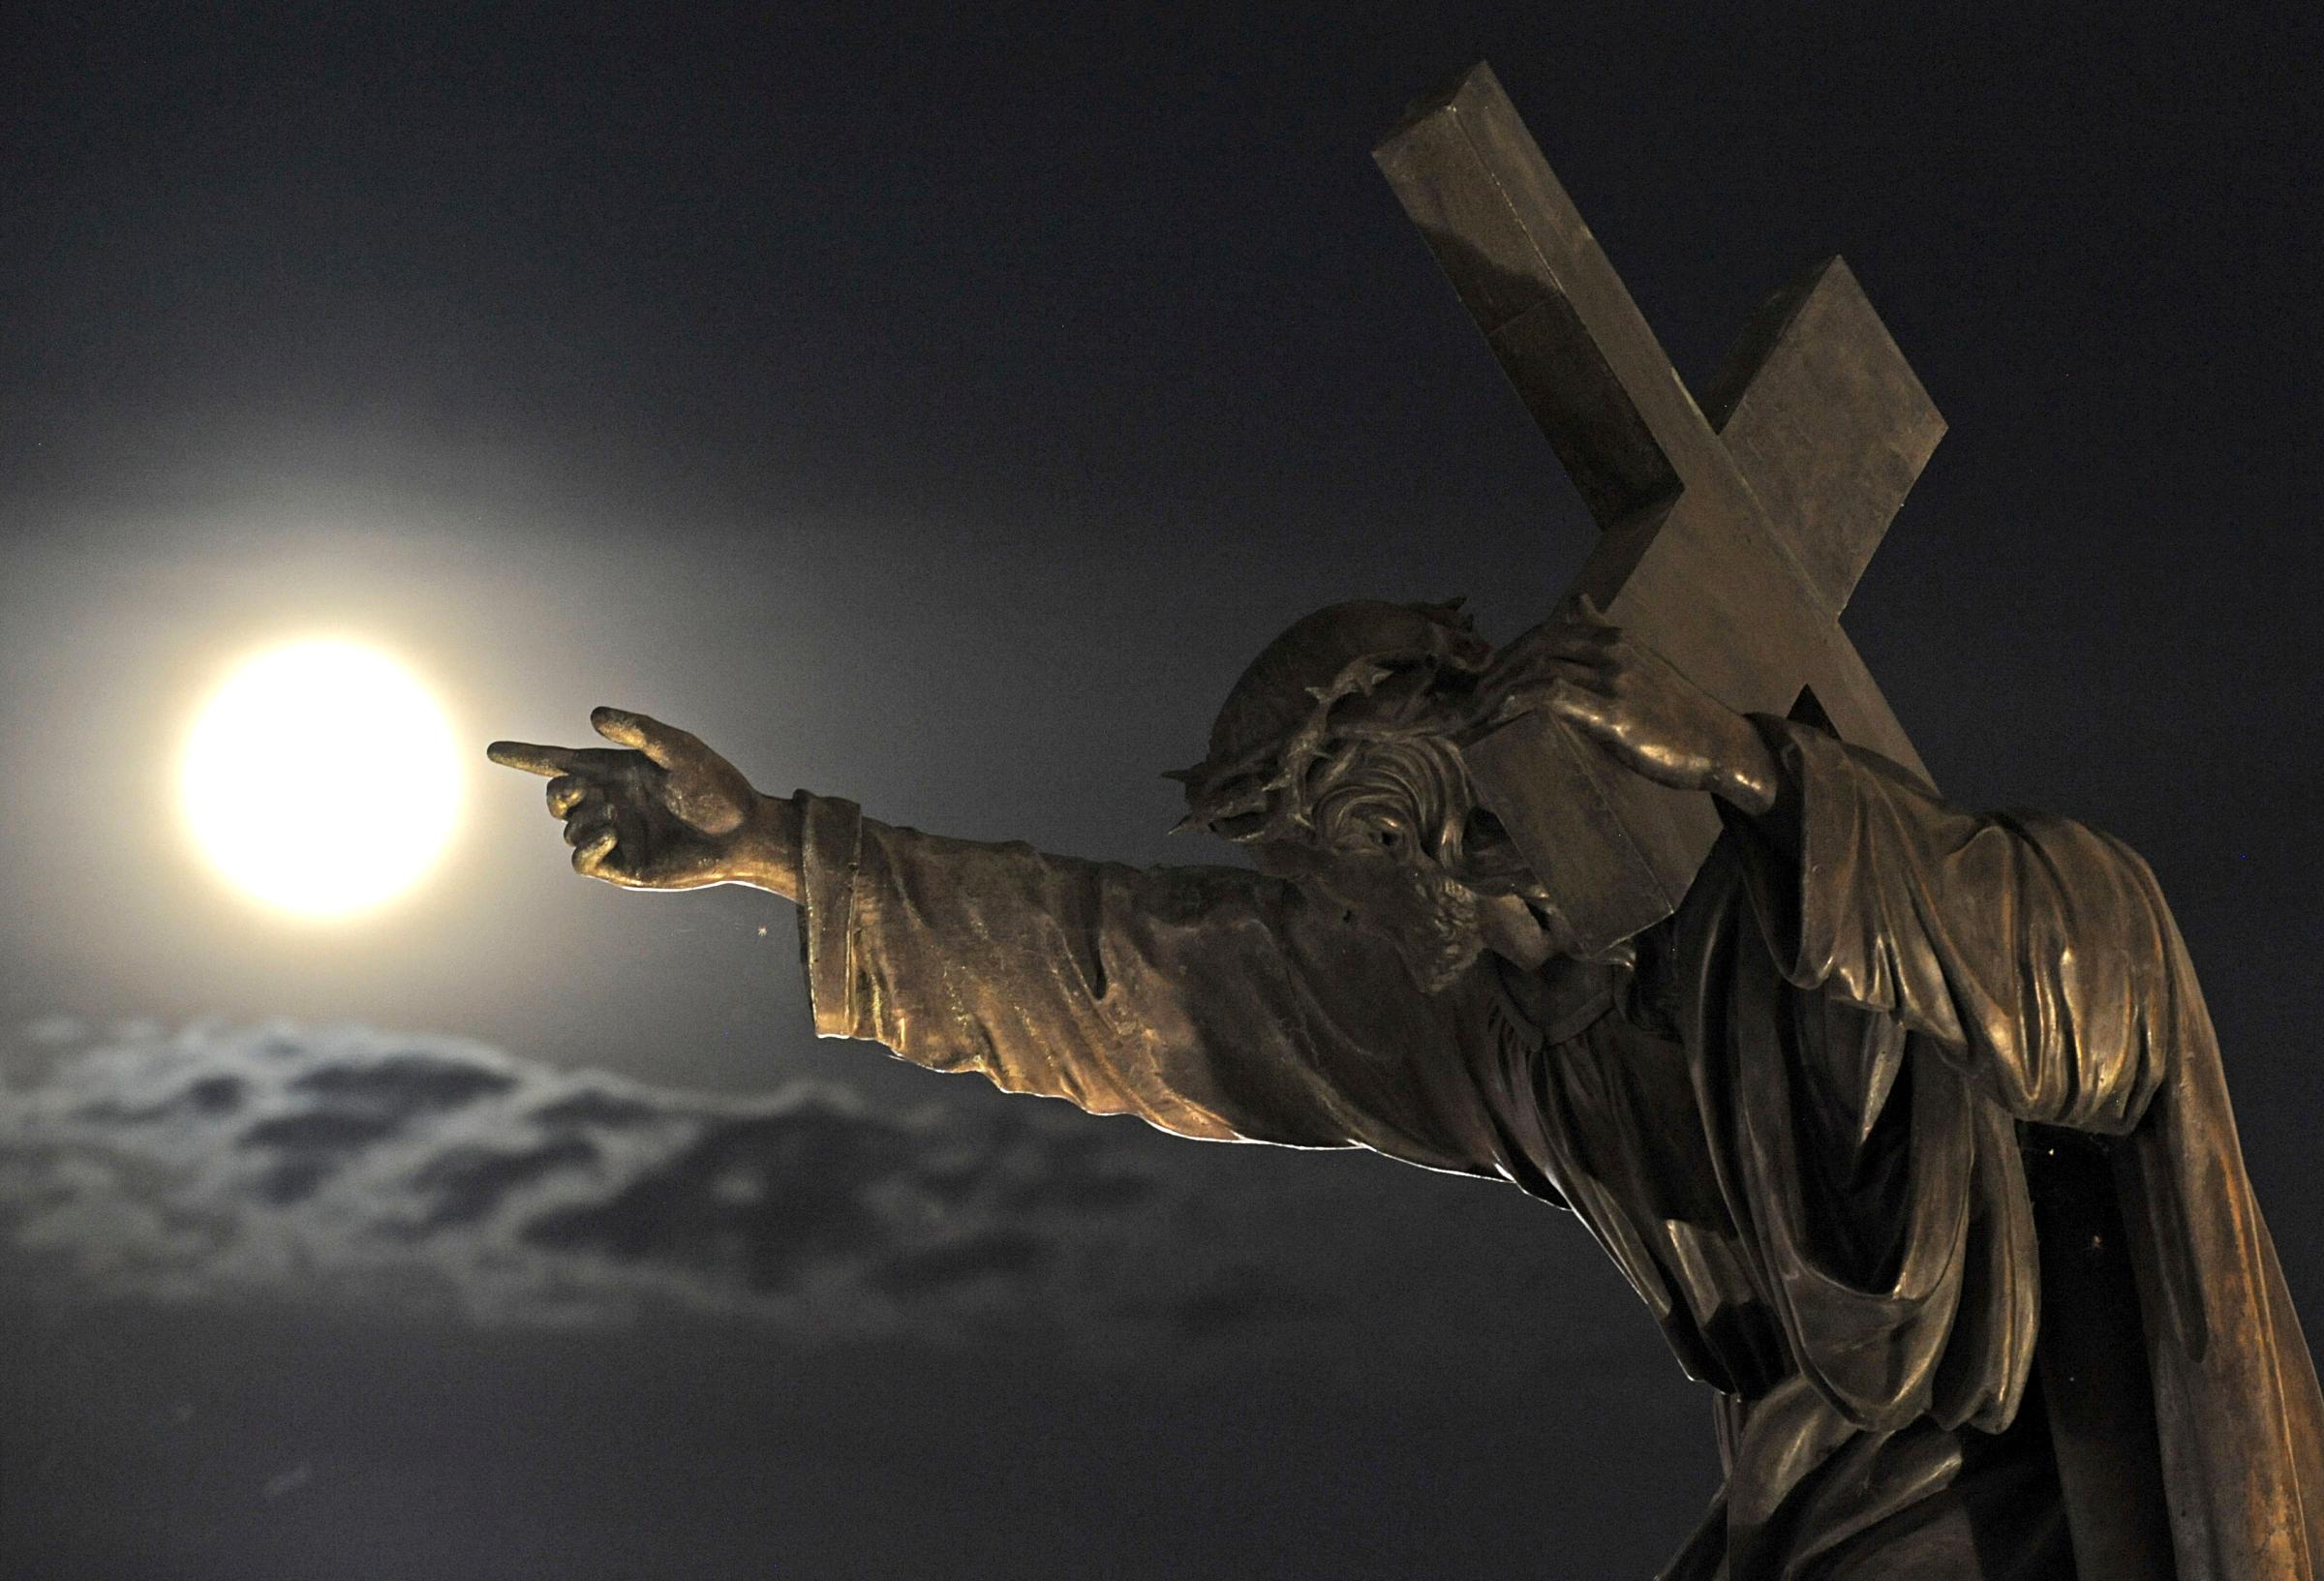 A supermoon rises above a Jesus Christ statue in front of the Holy Cross church in Warsaw, Poland on August 10, 2014.